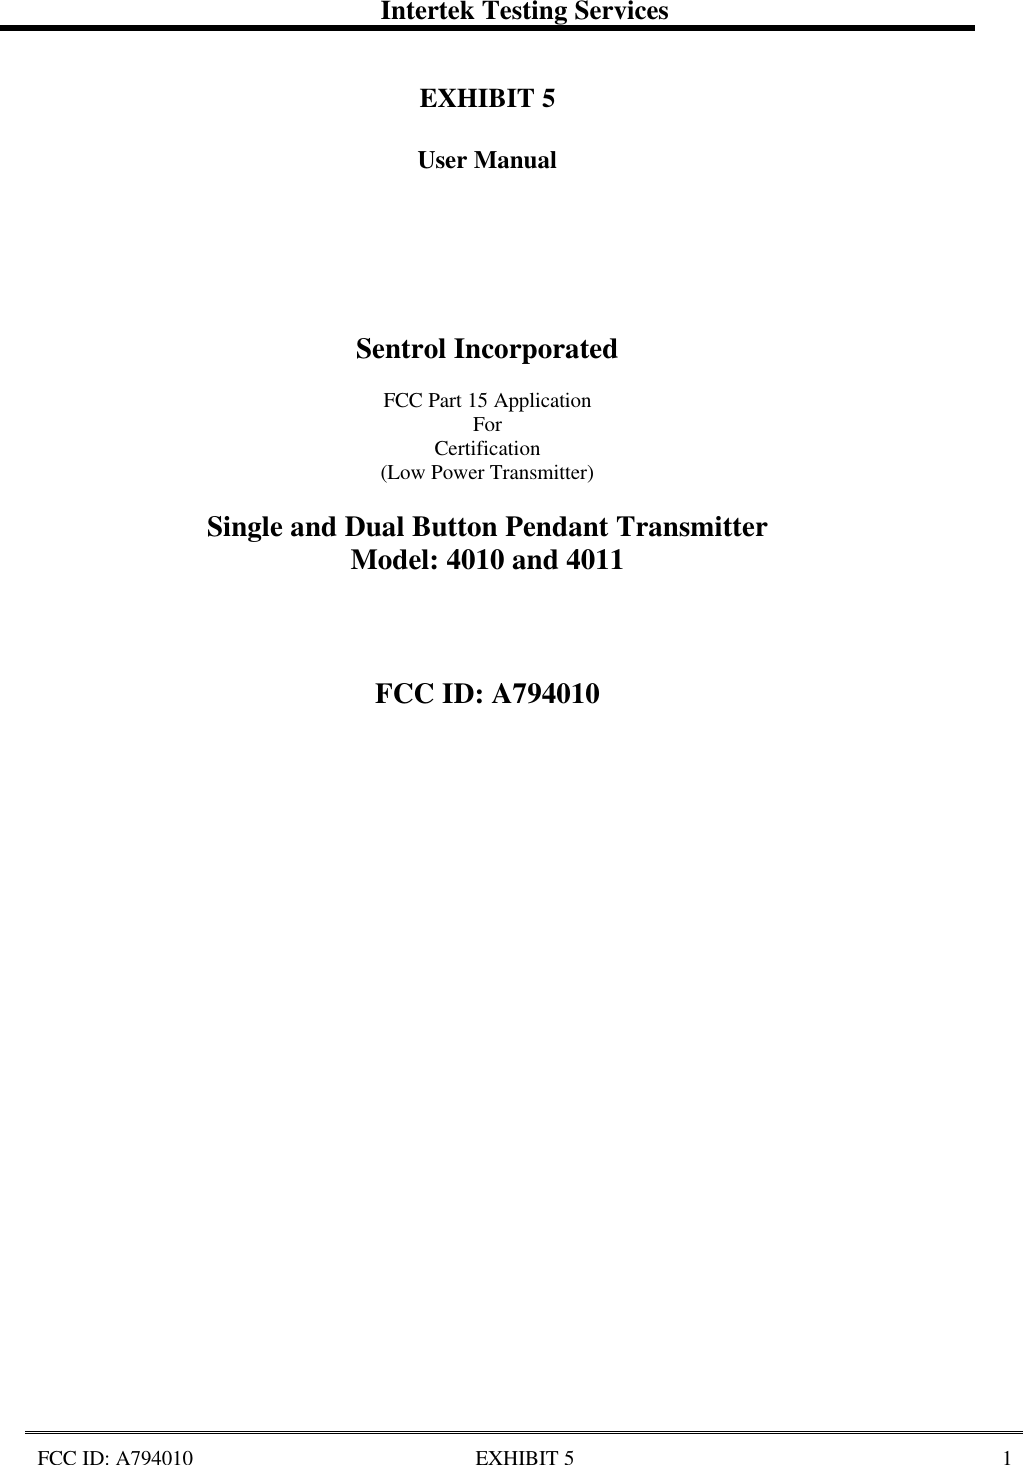 Intertek Testing ServicesFCC ID: A794010 EXHIBIT 5 1EXHIBIT 5User ManualSentrol IncorporatedFCC Part 15 ApplicationForCertification(Low Power Transmitter)Single and Dual Button Pendant TransmitterModel: 4010 and 4011FCC ID: A794010